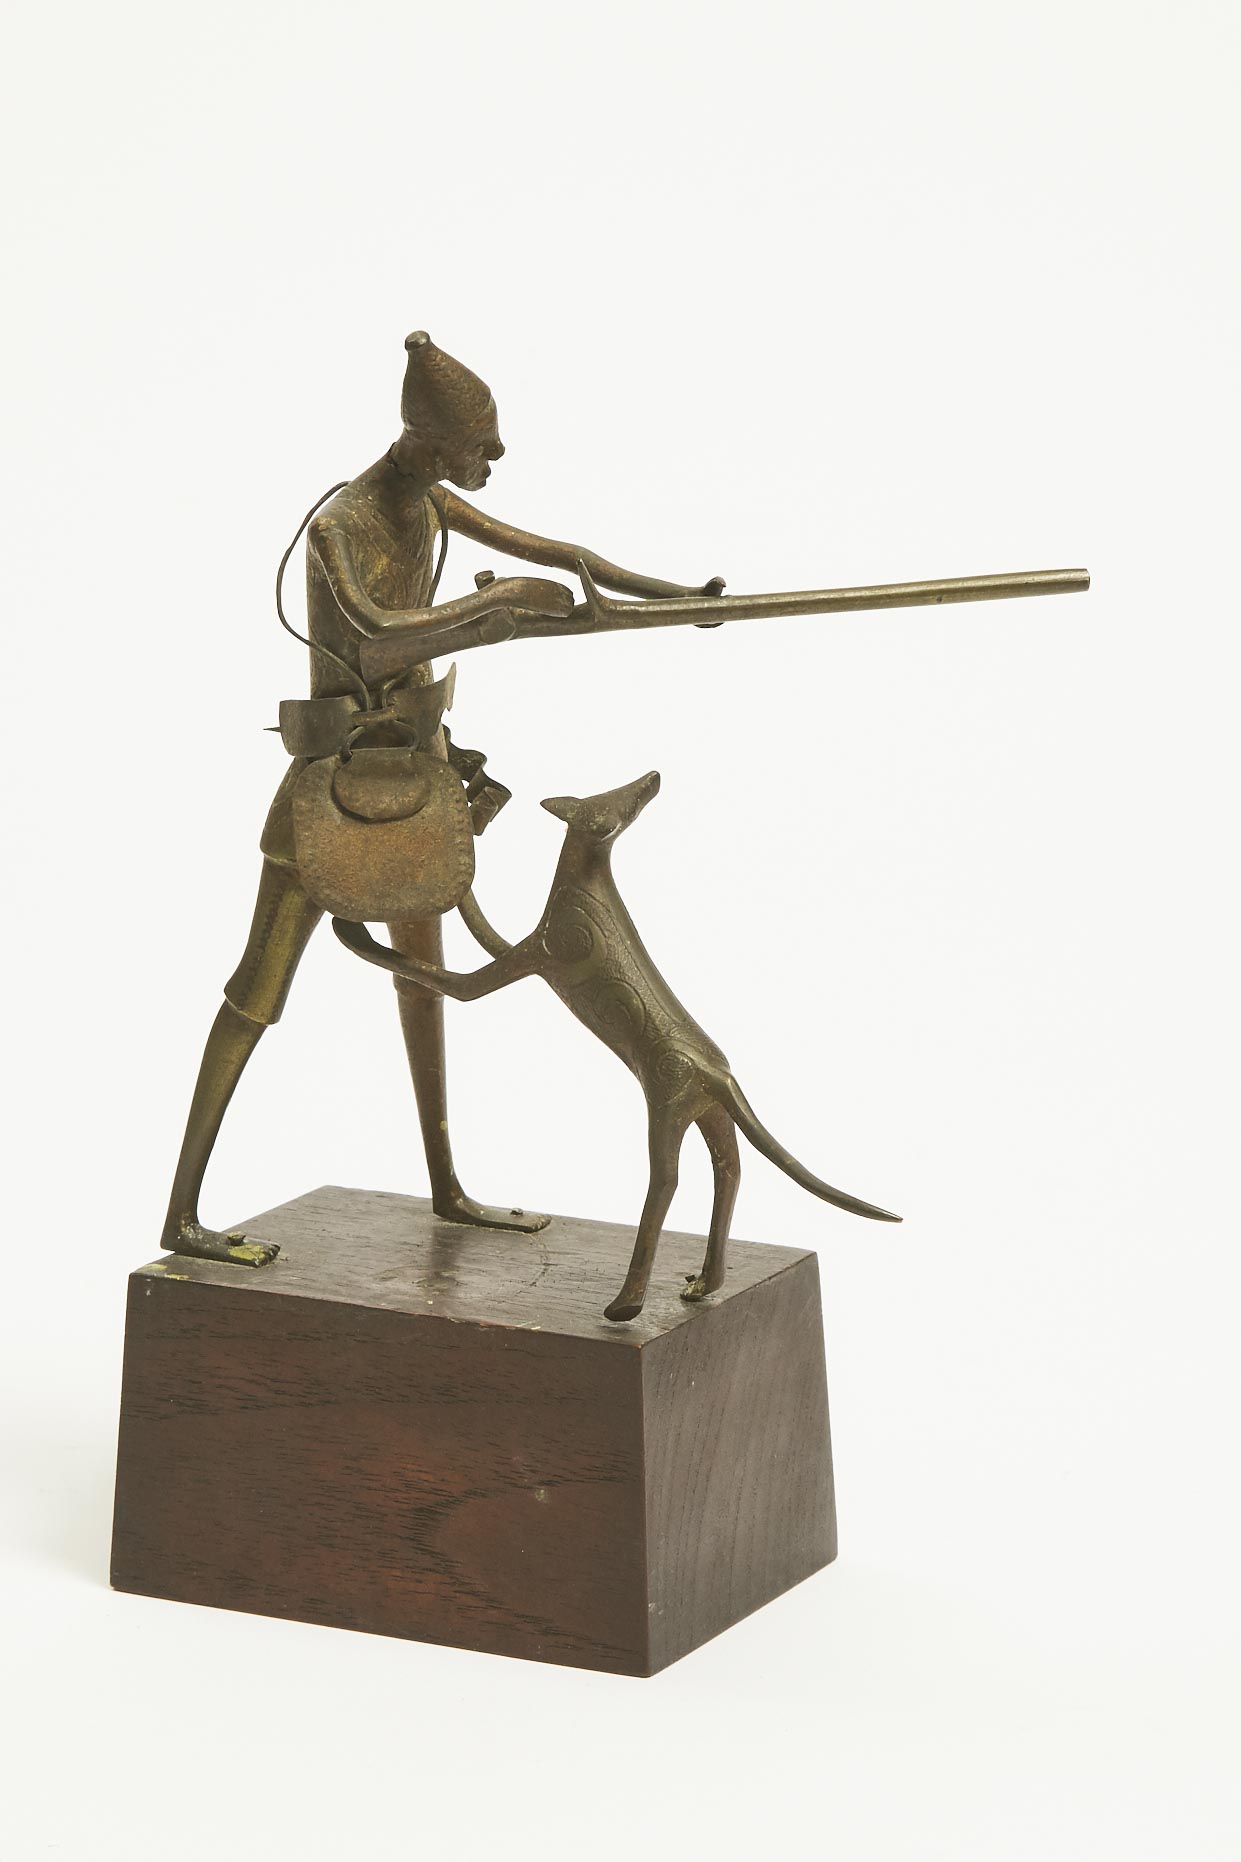 West African Bronze Hunter and Dog, possibly Yoruba/Ashanti, early 20th century